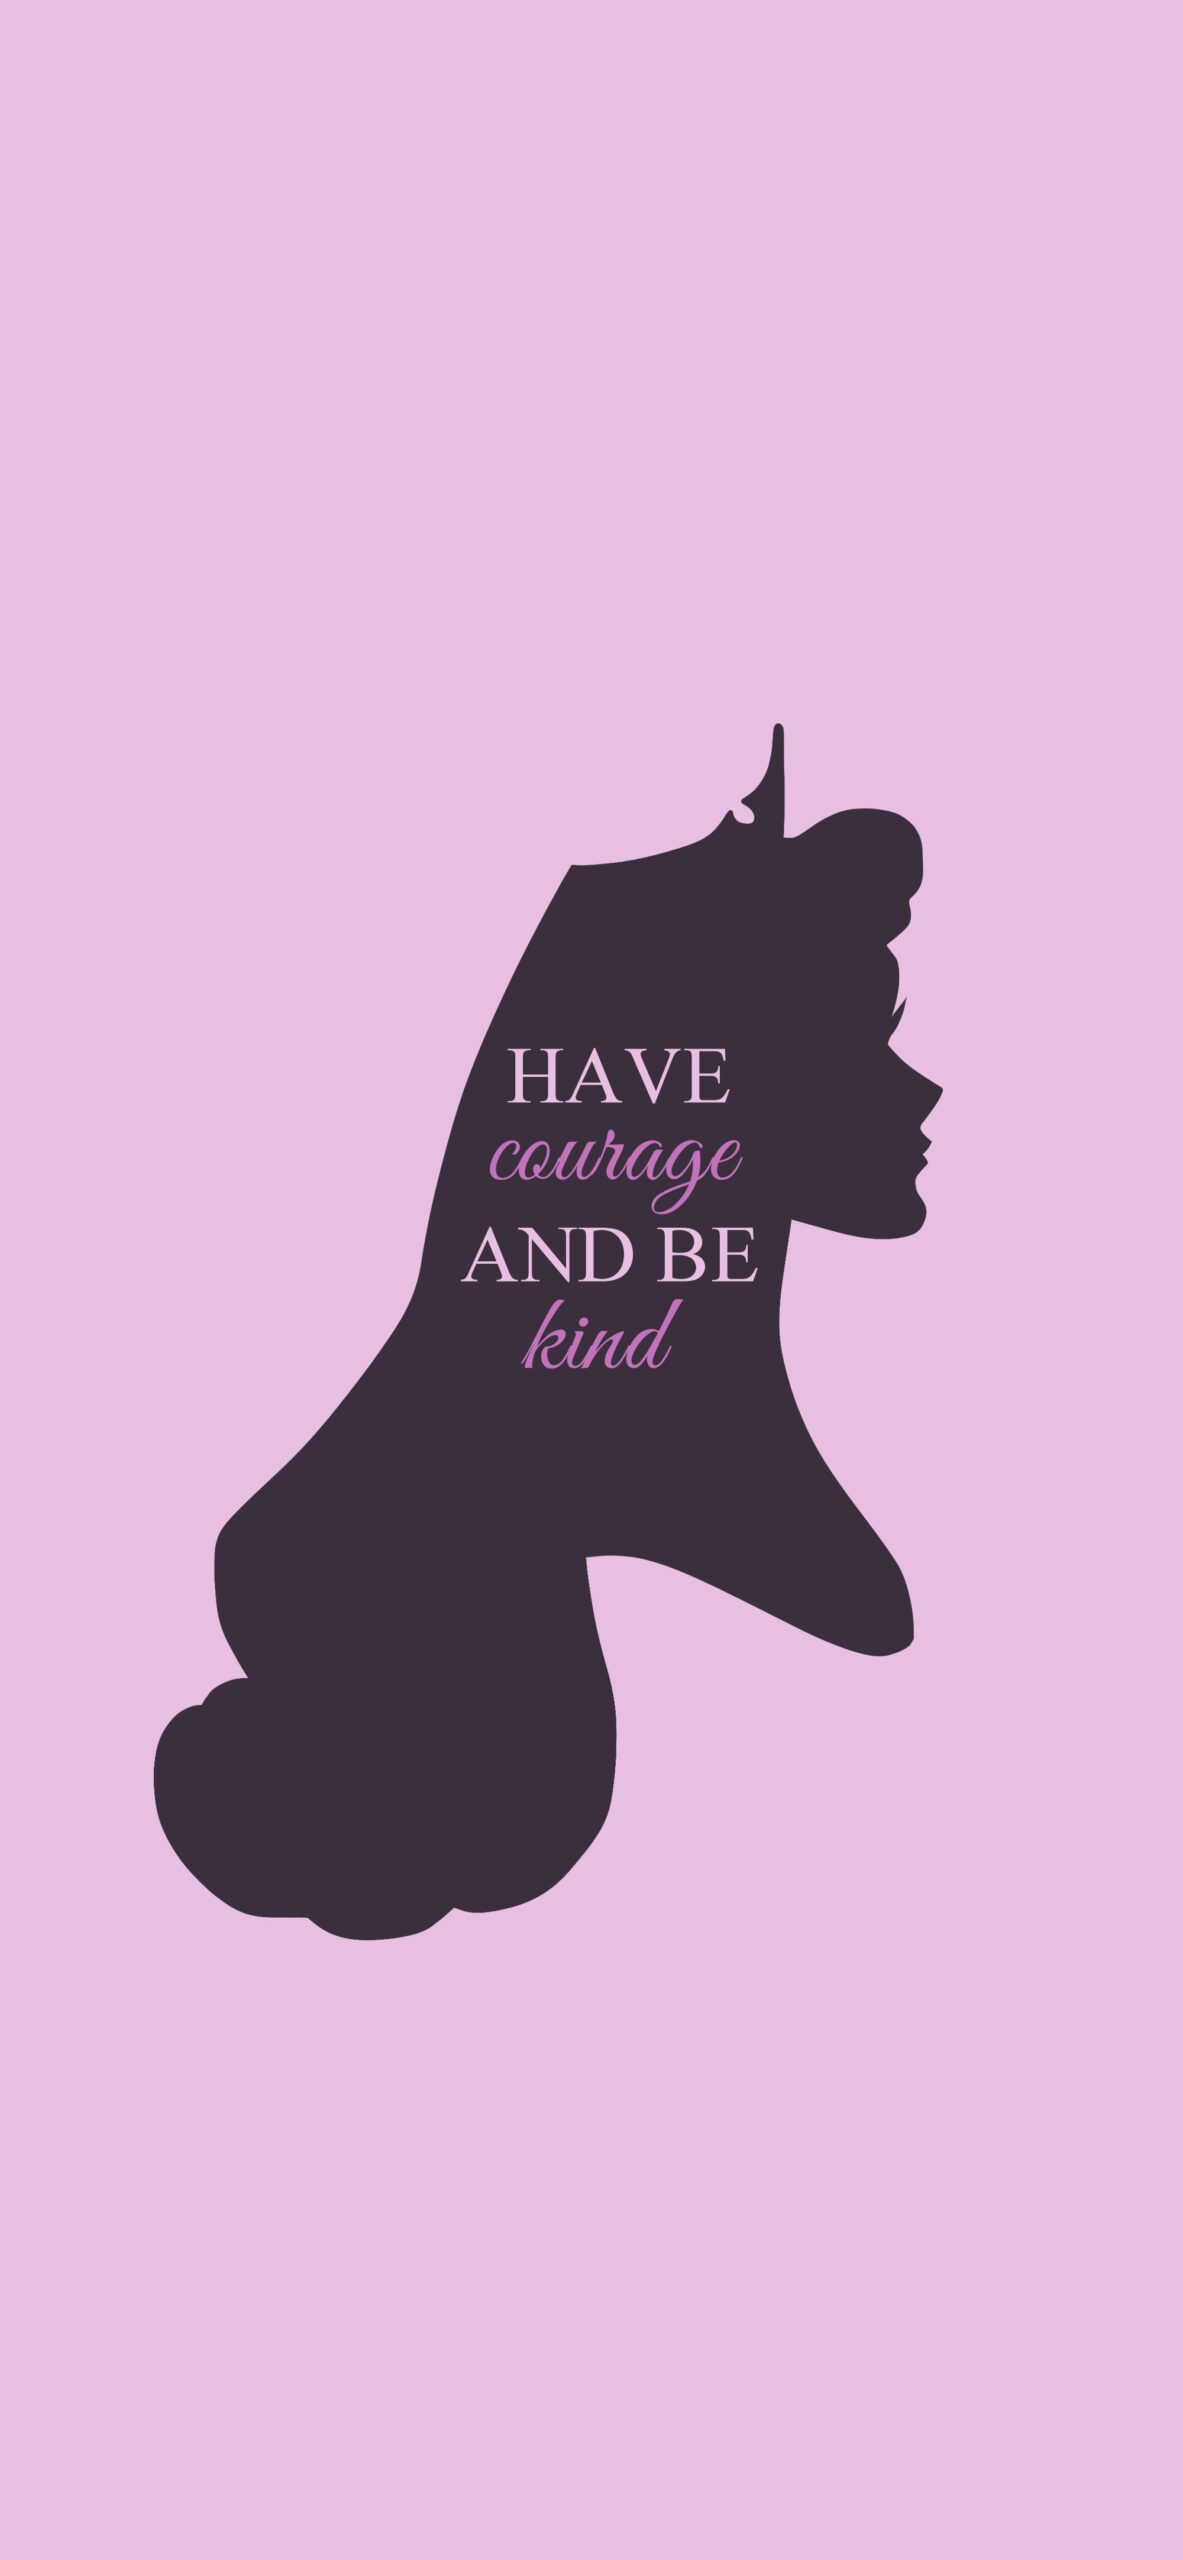 The silhouette of a woman with text that says have and be kind - Disney, minimalist, princess